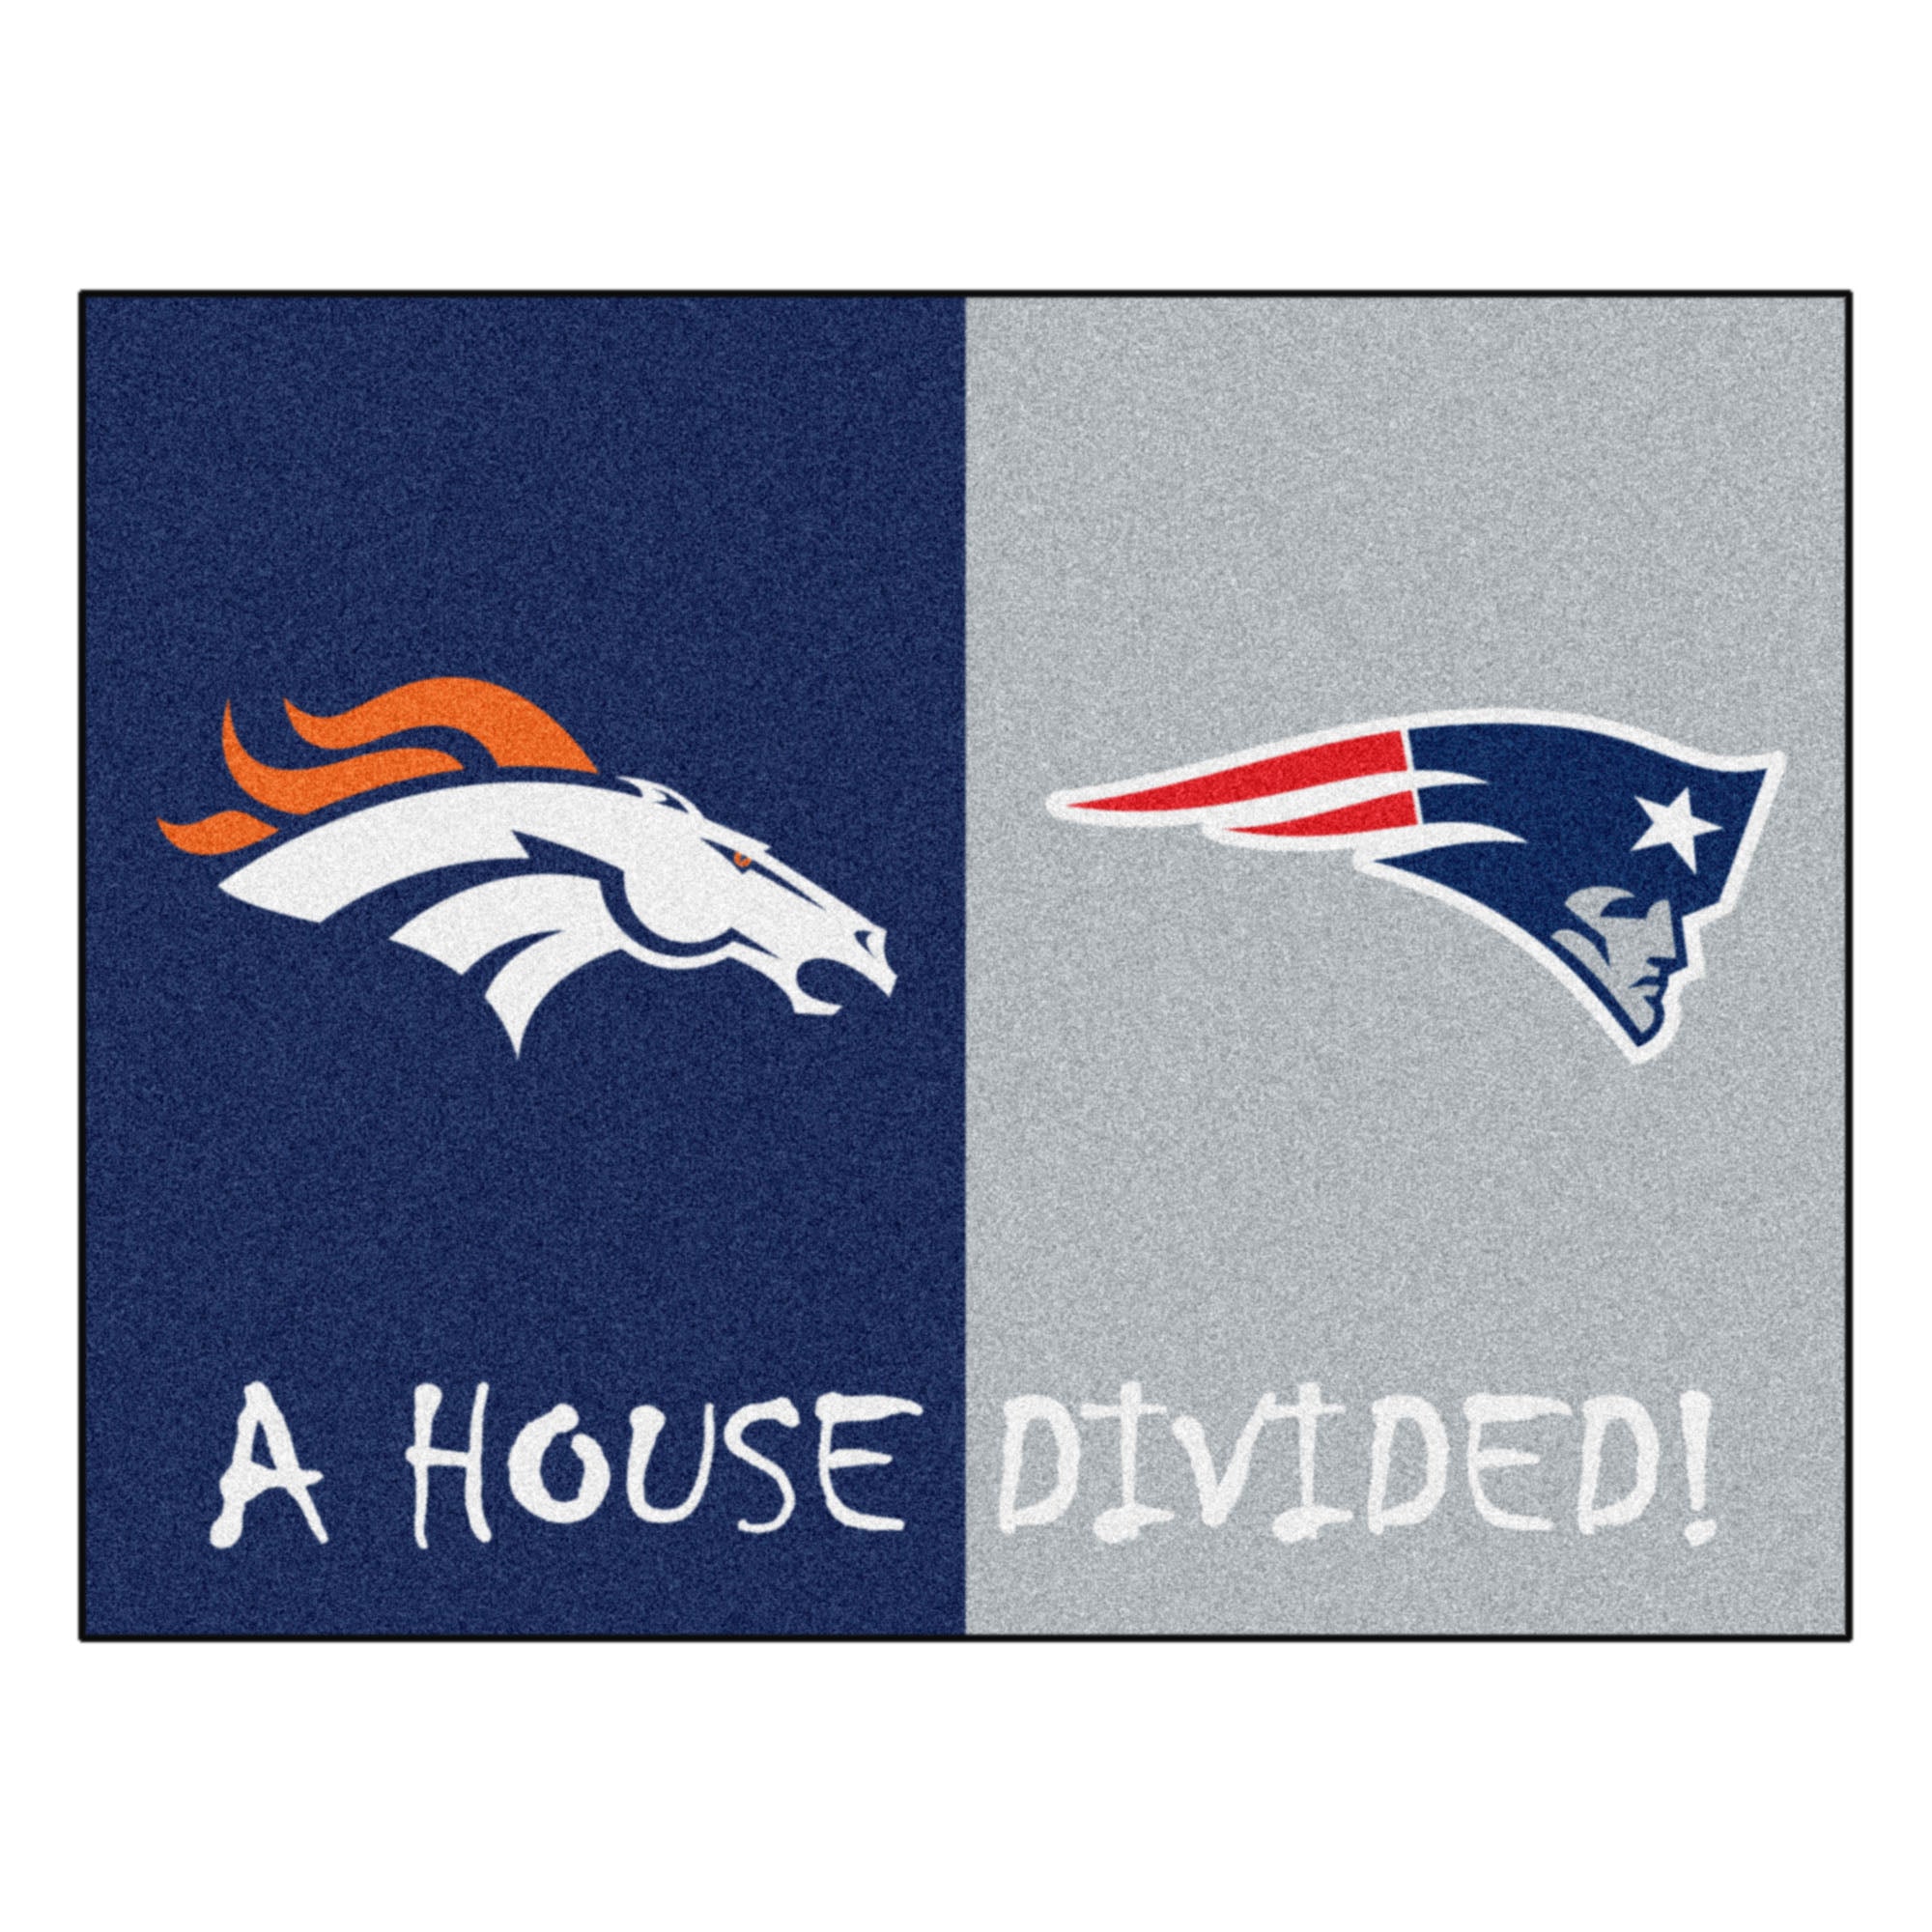 NFL House Divided - Broncos / Steelers House Divided Mat